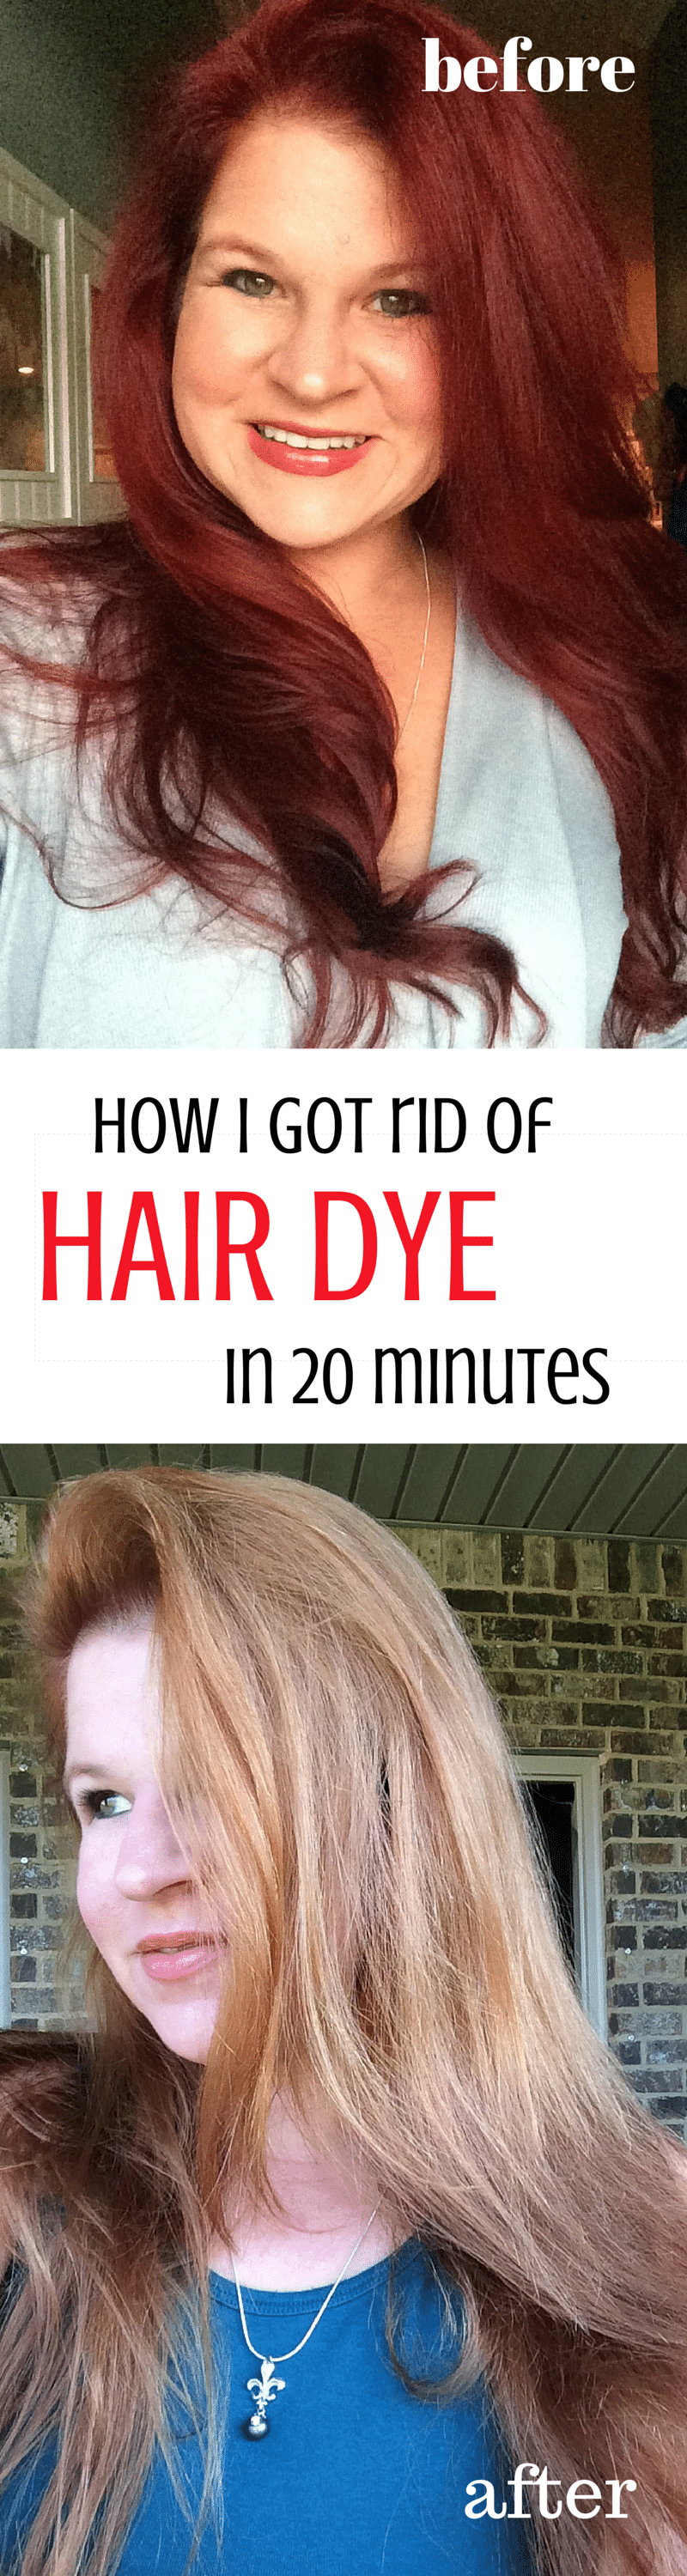 How I got rid of hair dye in 20 minutes, what I used that DIDNT fry my hair and took out a huge color mistake to restore my dignity 